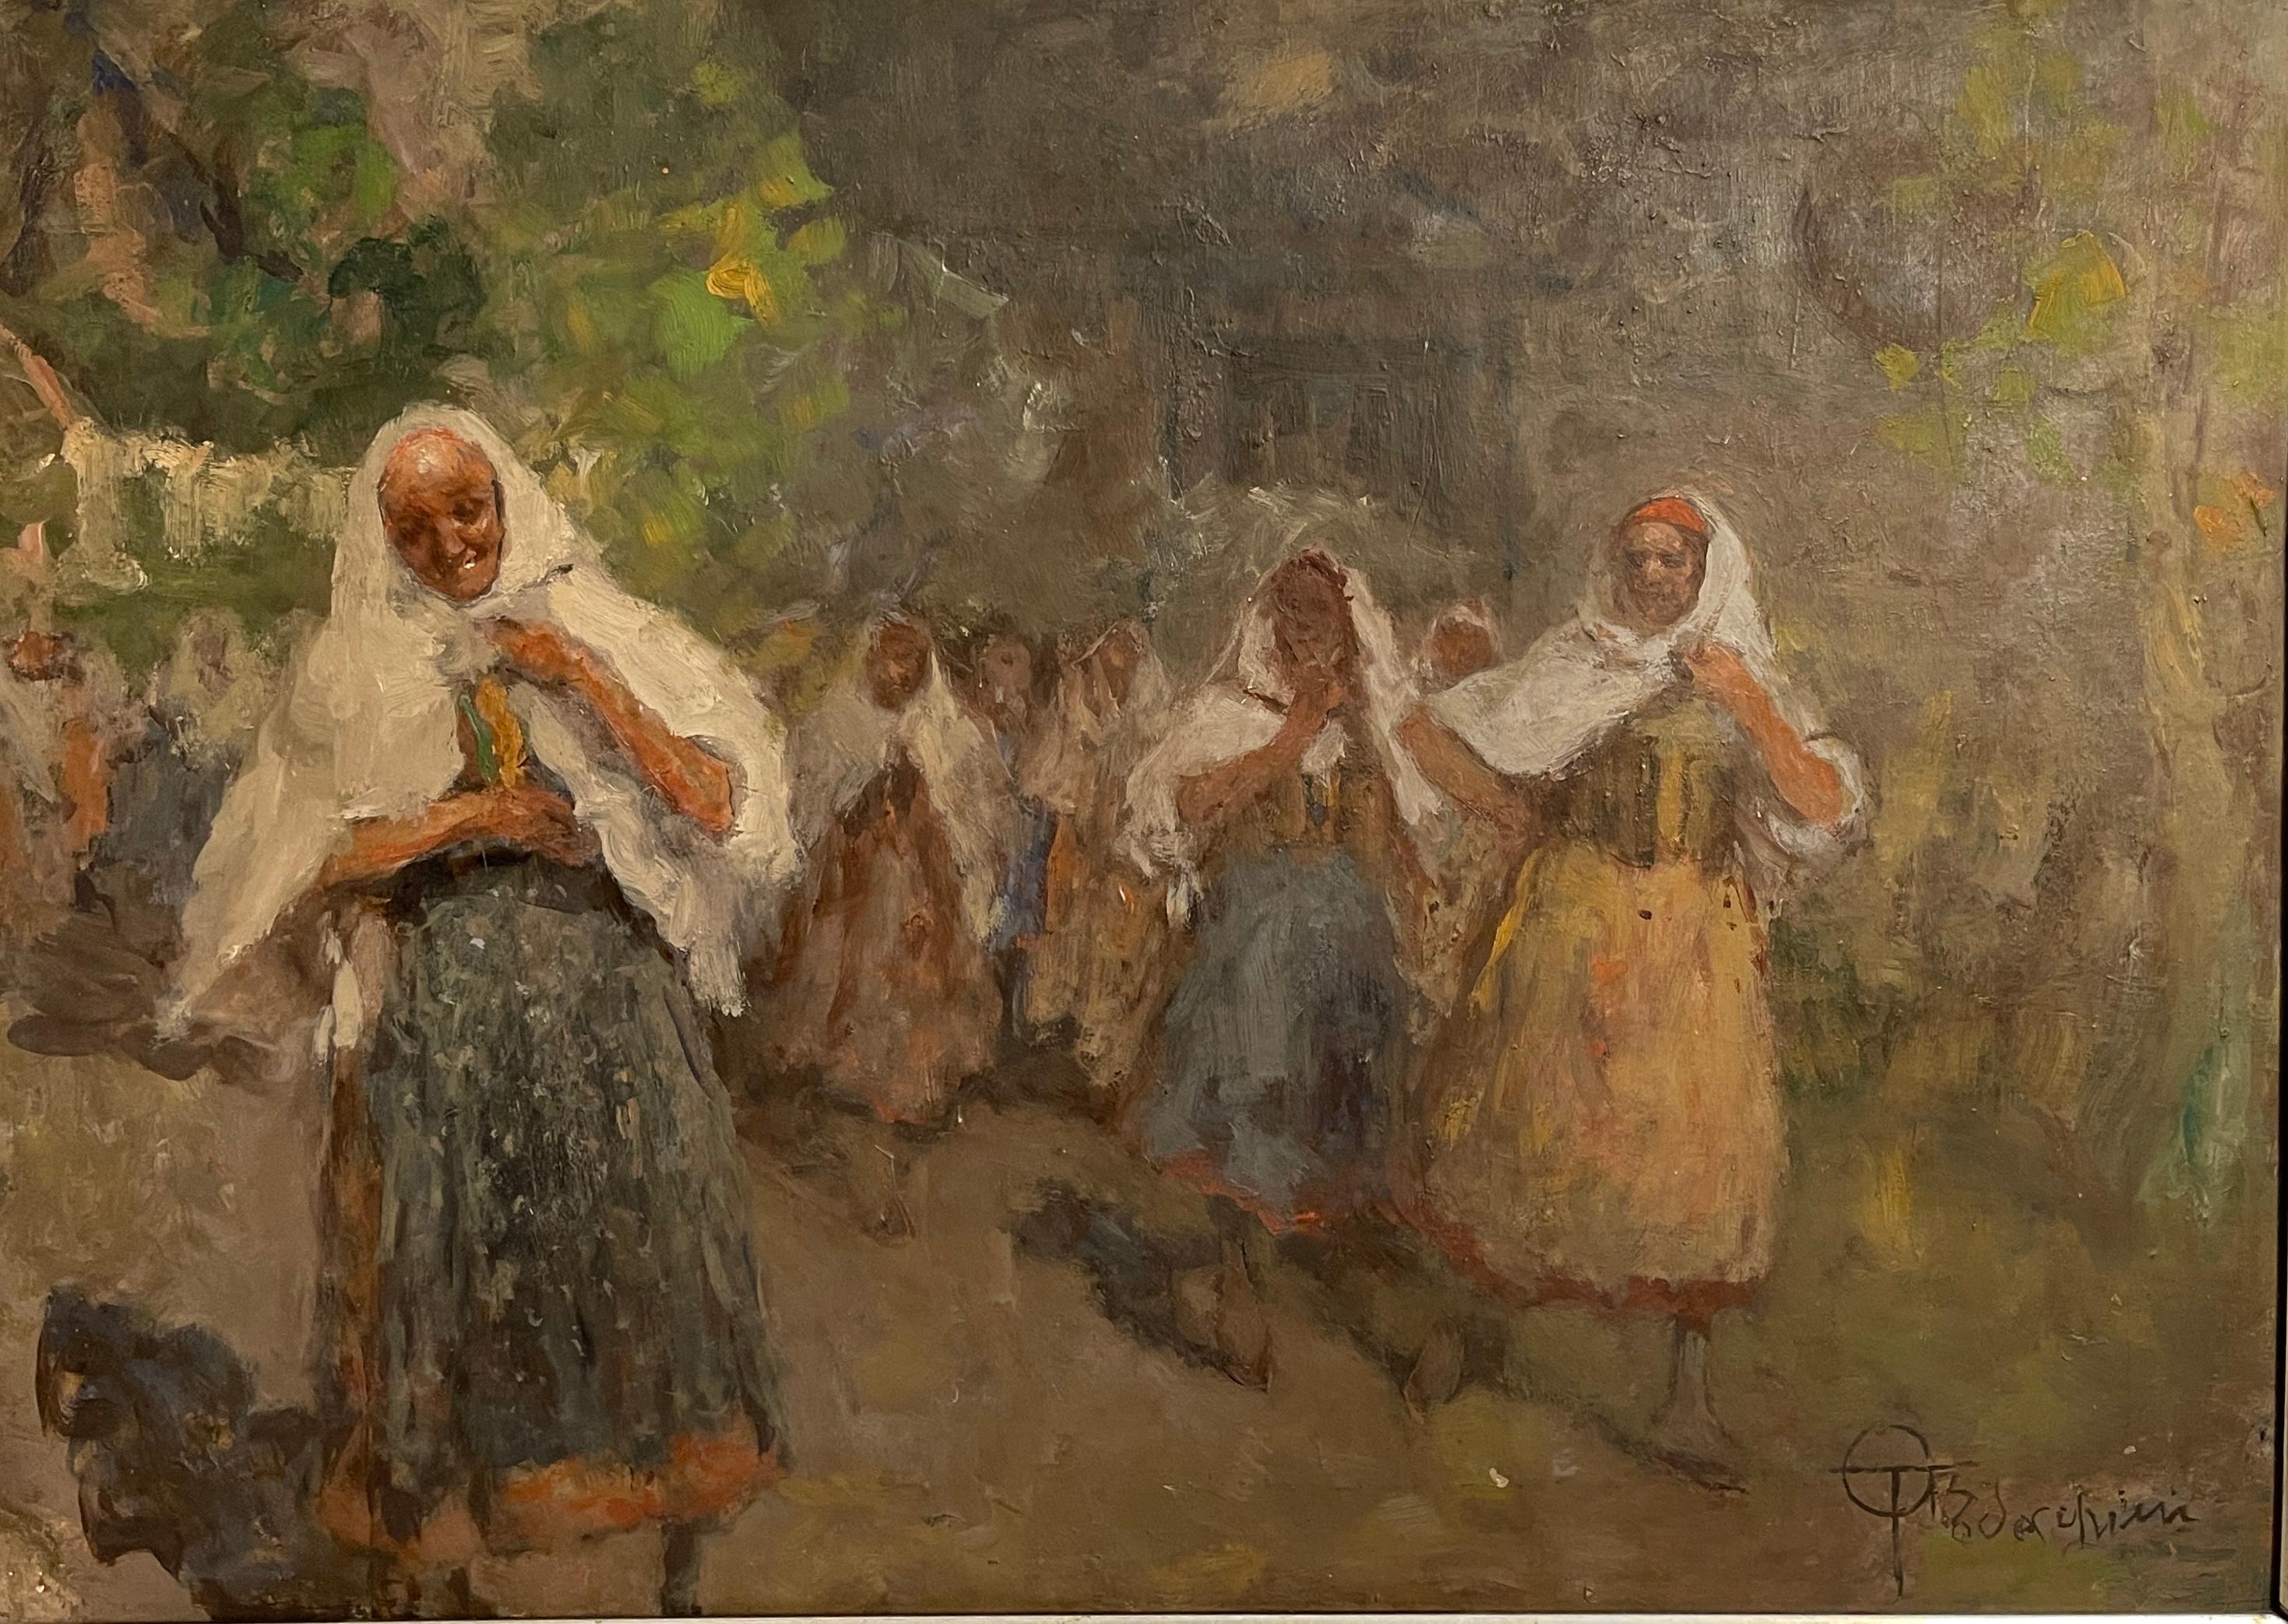 A painting that well represents the Italian nineteenth century, in technique and subjects, the work is full of characterized figures and represents the 